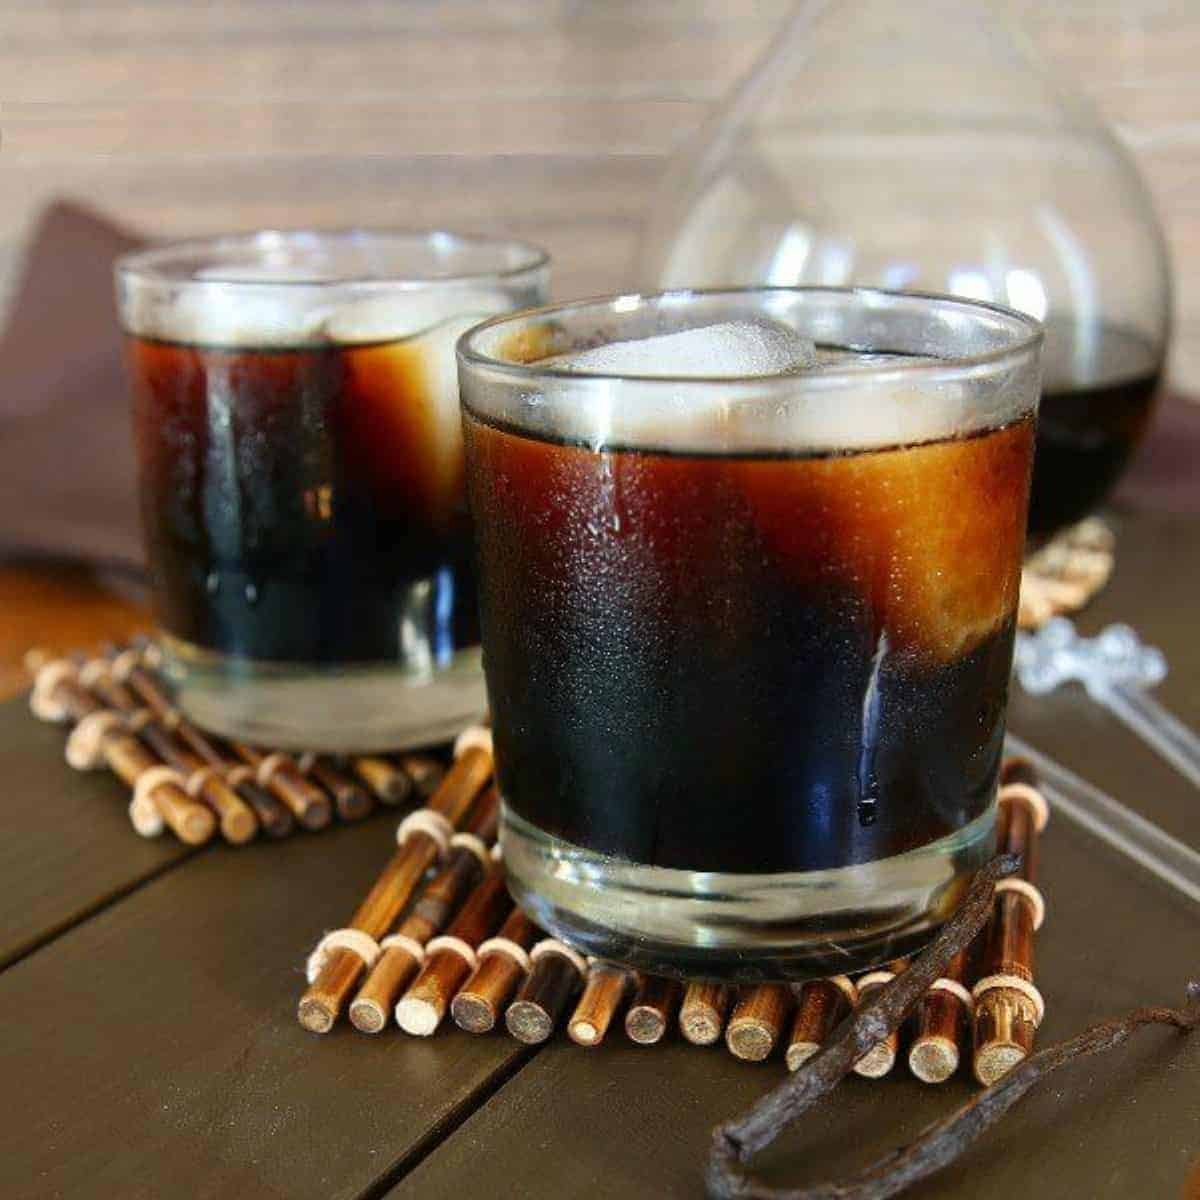 Two glasses filled with ice and dark Kahlua.